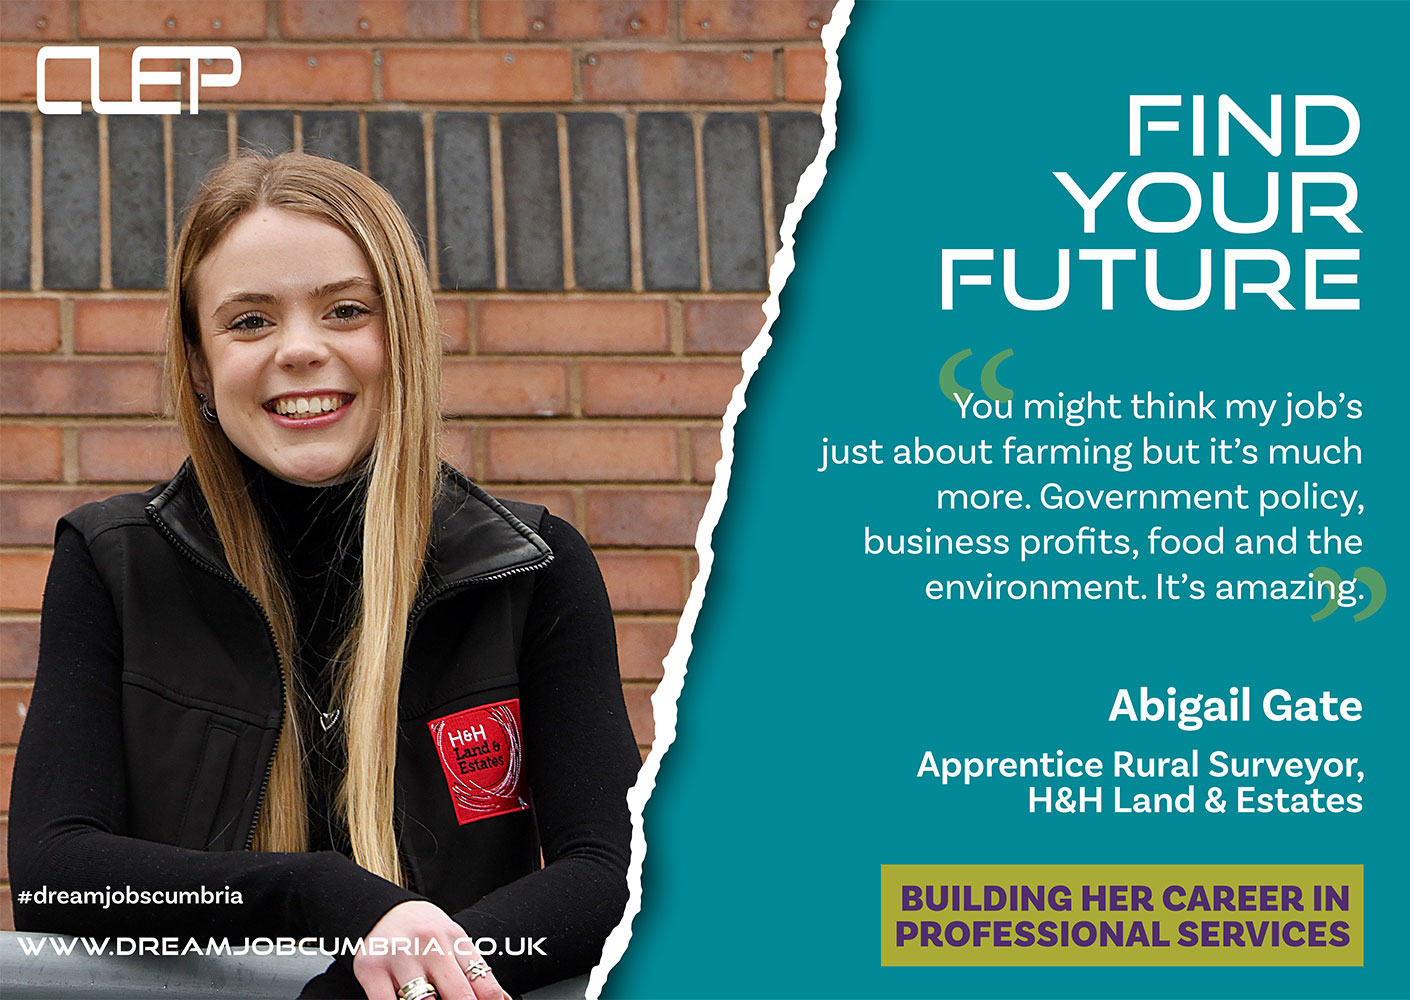 Find your future: You might think my job's just about farming but it's much more. Government policy, business profits, food and the environment. It's amazing. (Photo of Abigail Gate)